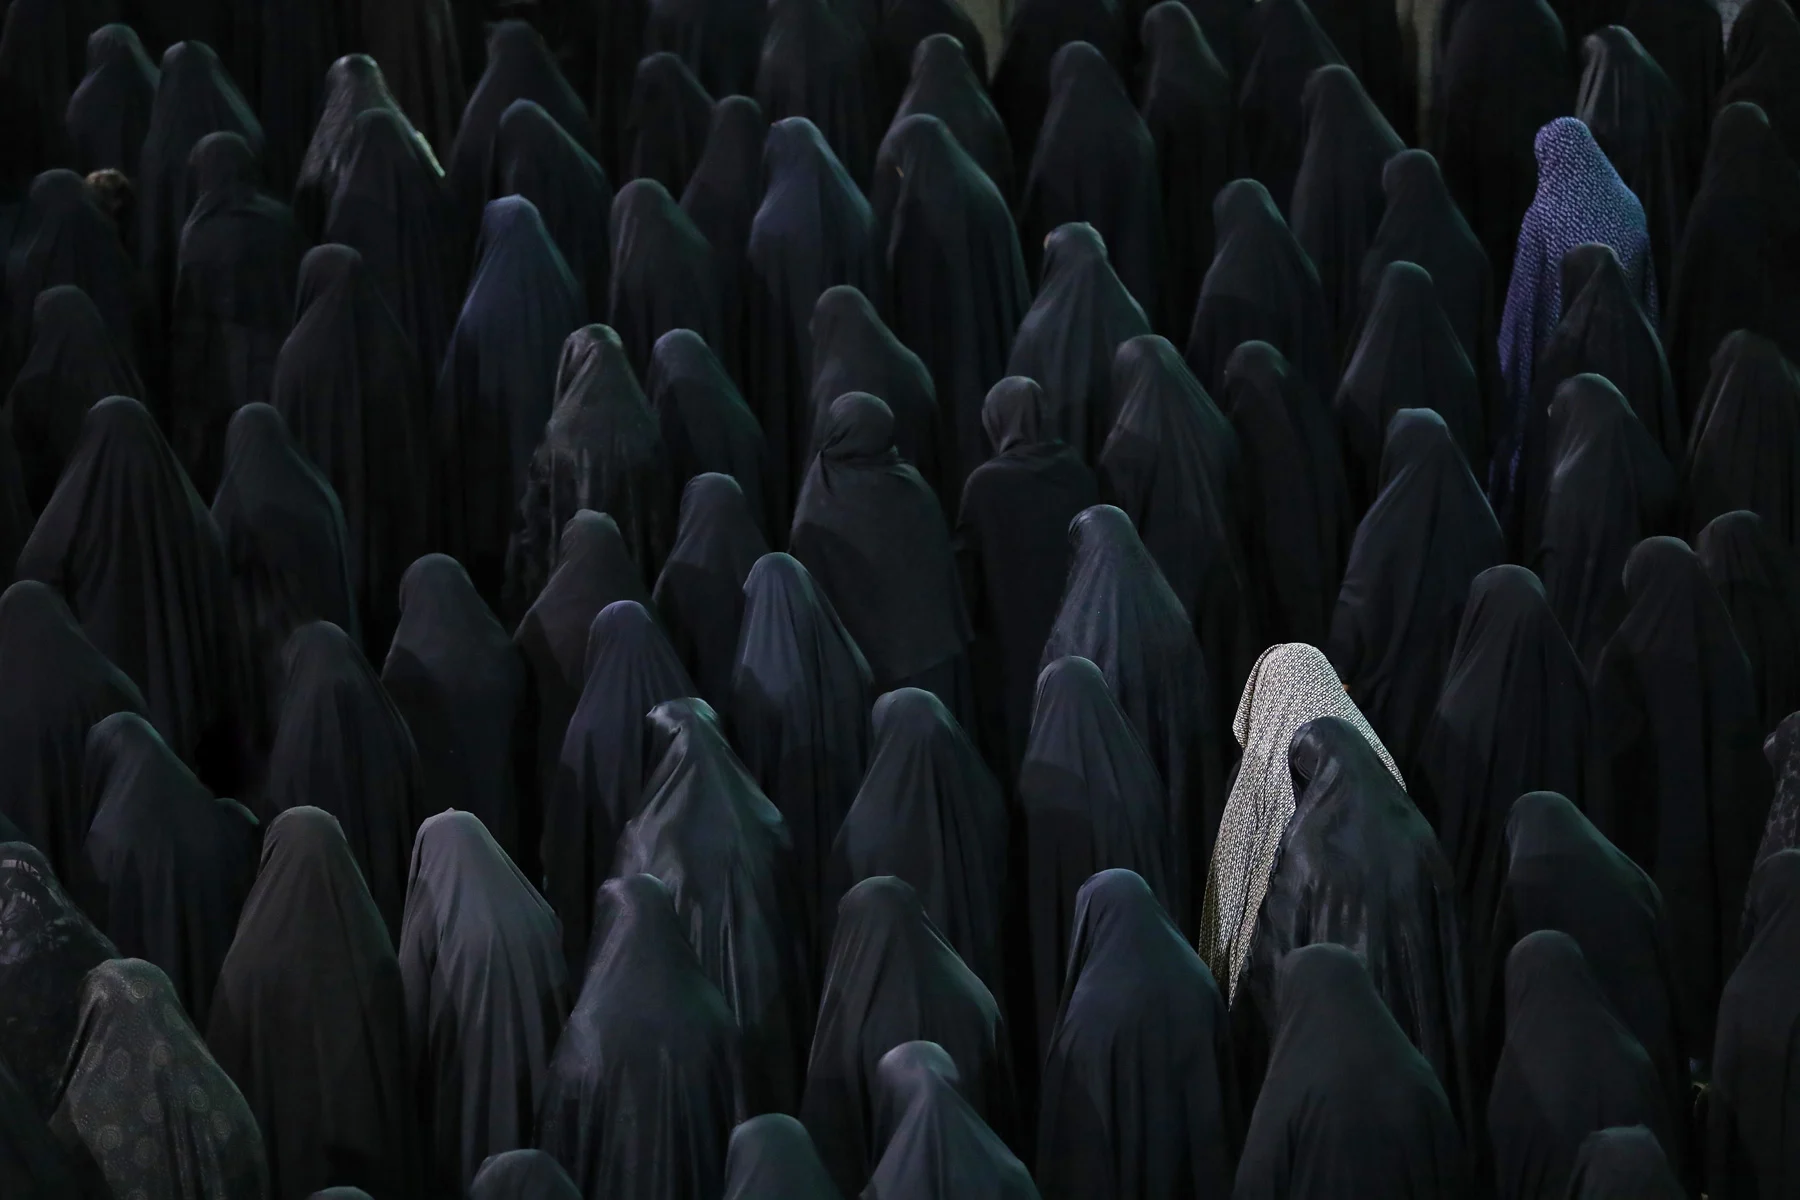 A picture of a group of women performing the collective prayer, dressed to worship Islam, standing in solidarity.